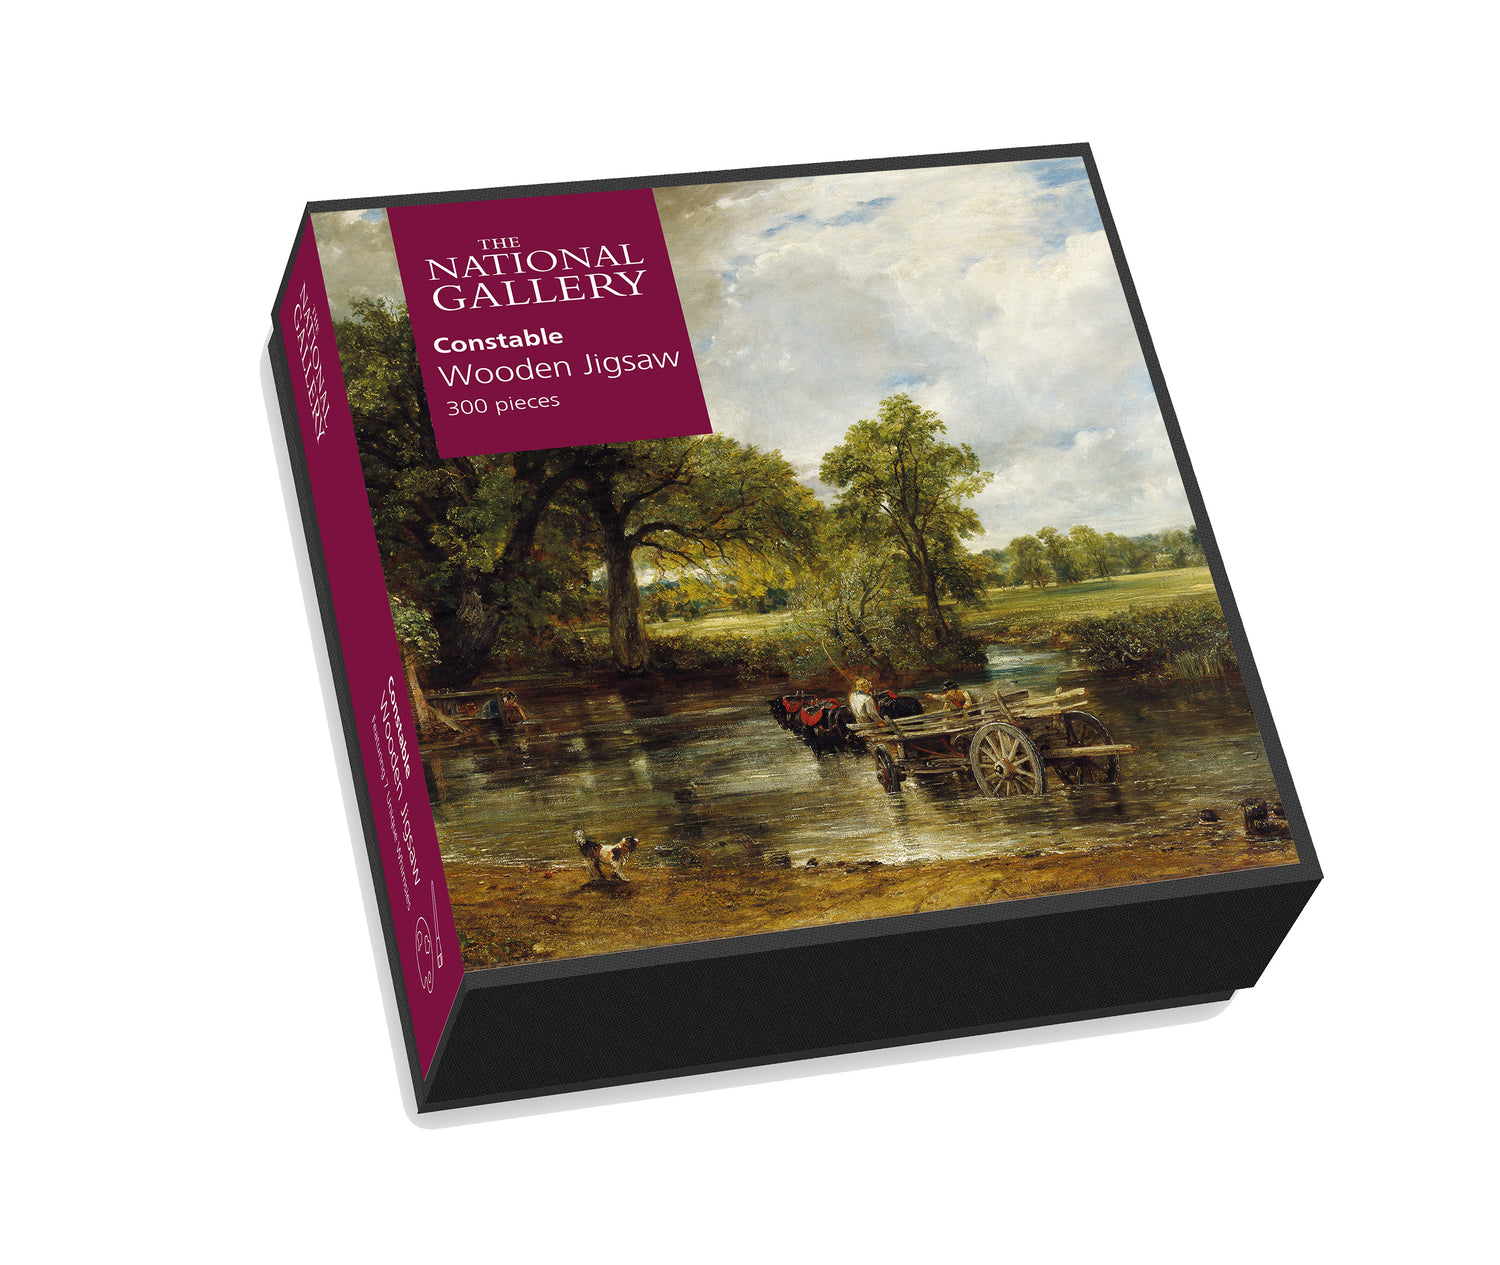 National Gallery 300 Piece Wooden Jigsaw Puzzles